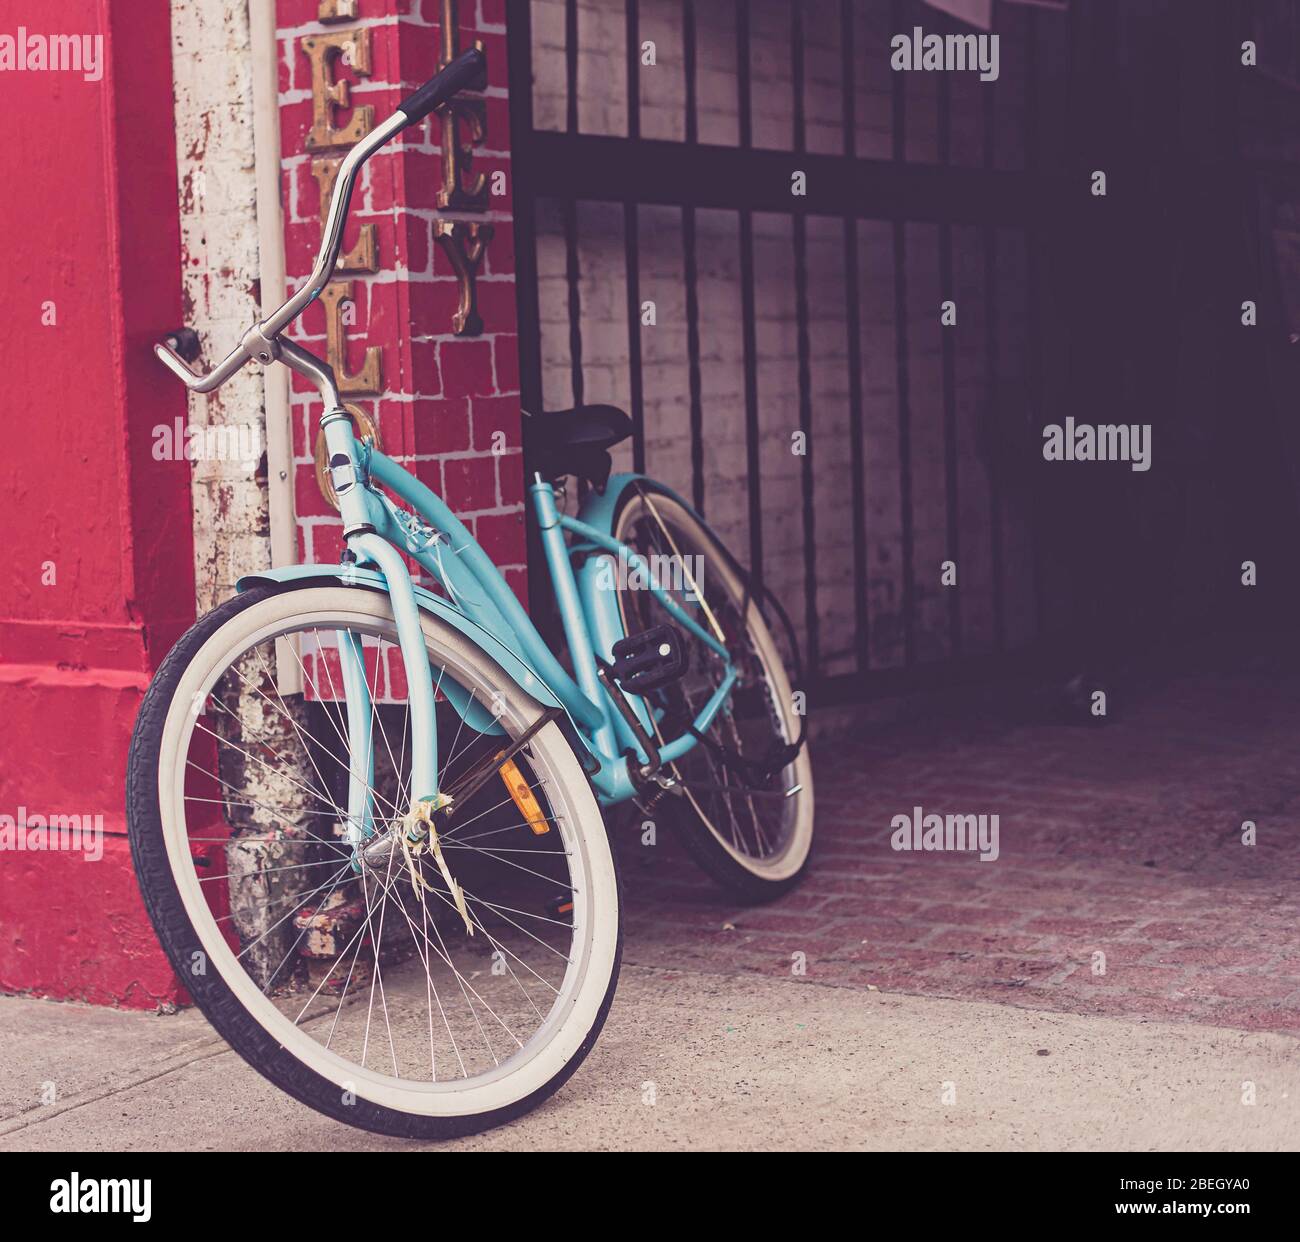 Turquoise blue bicycle leaning against bright red wall near an alley. Stock Photo